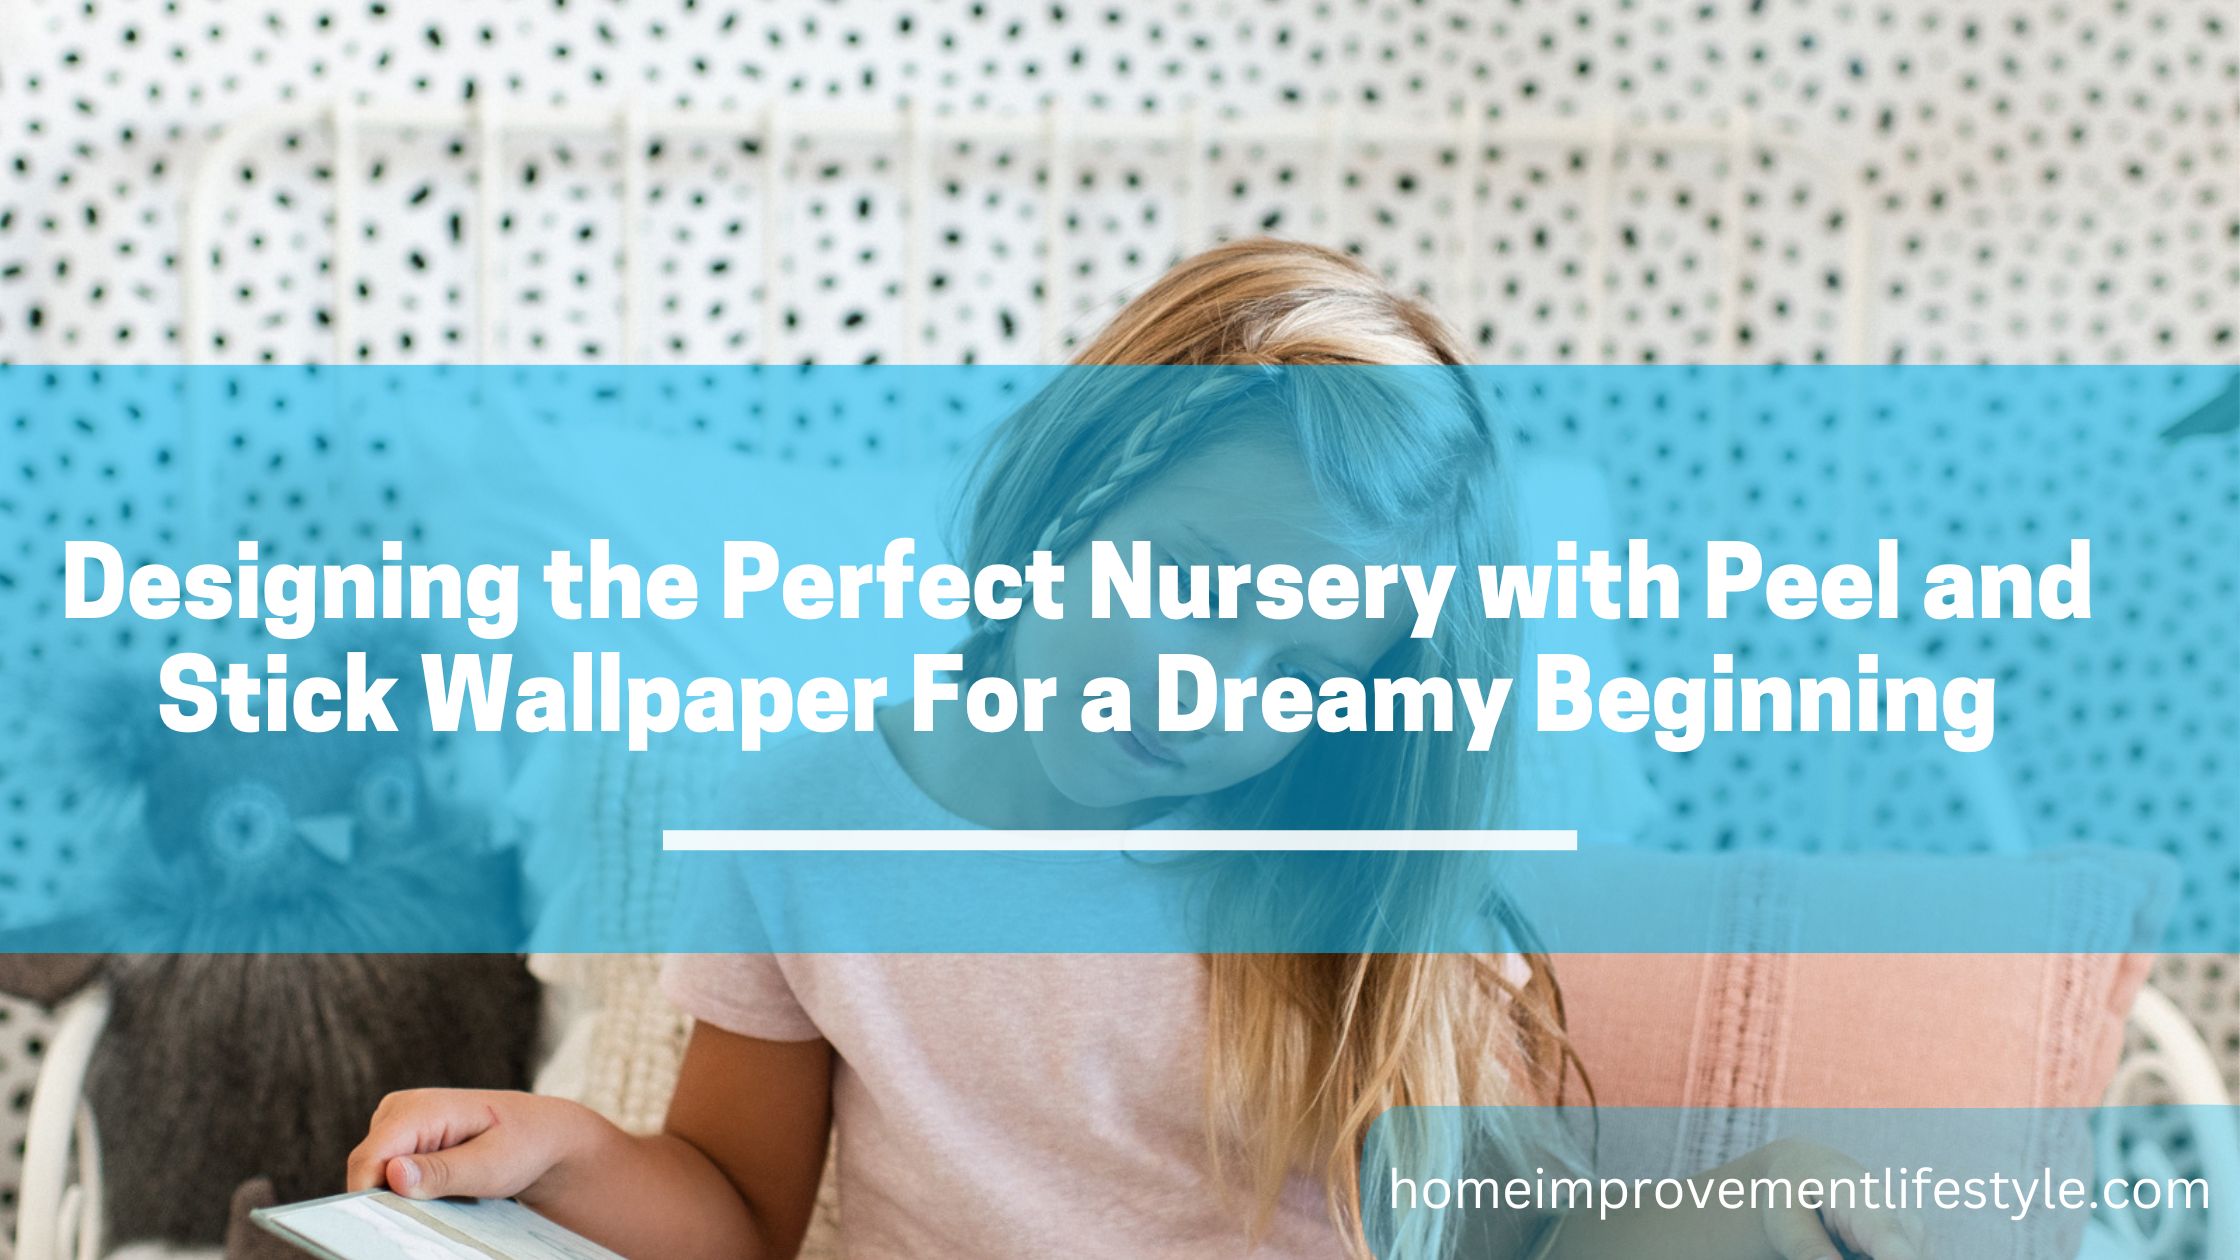 Designing the Perfect Nursery with Peel and Stick Wallpaper For a Dreamy Beginning